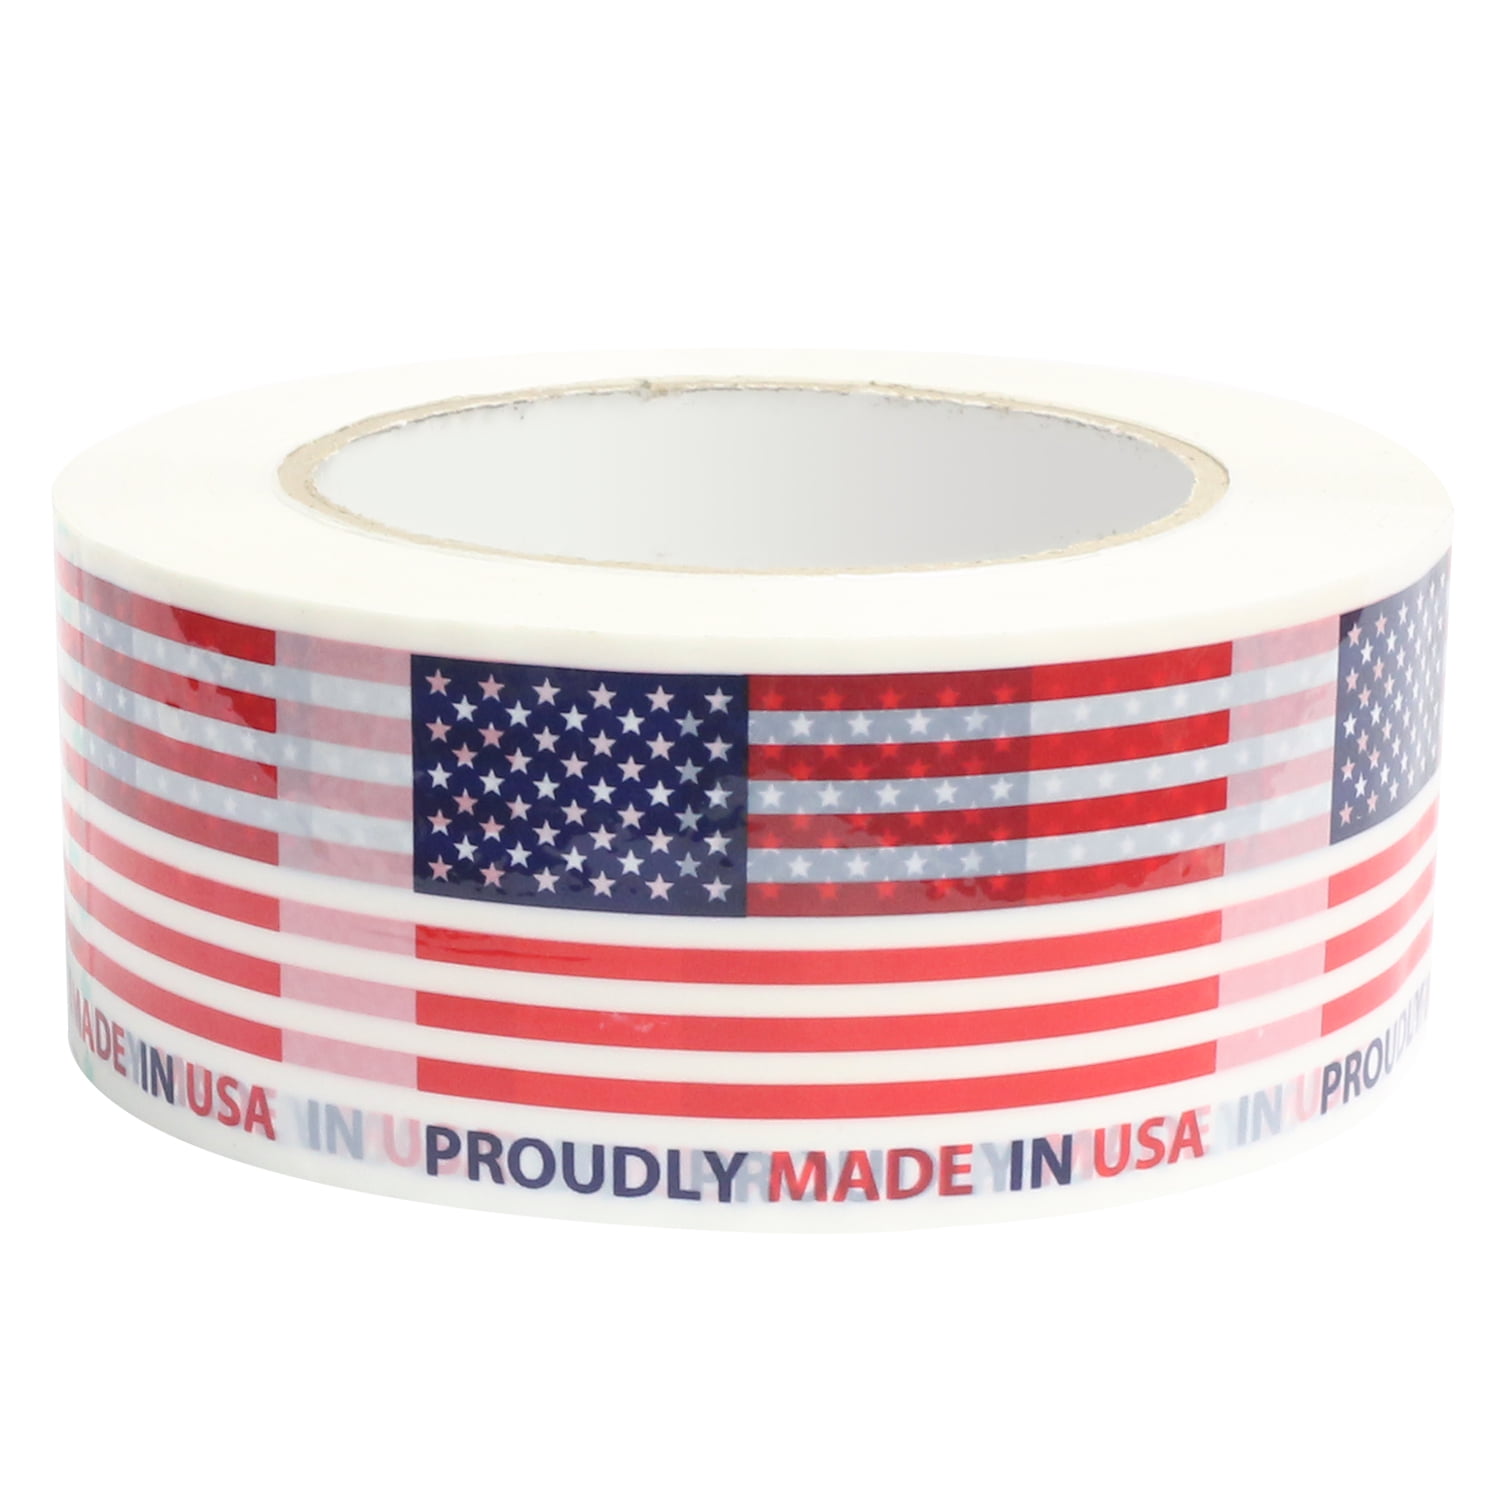 Milcoast Proudly Made in USA Packing Shipping Tape 3 Rolls 330 Yards Total 